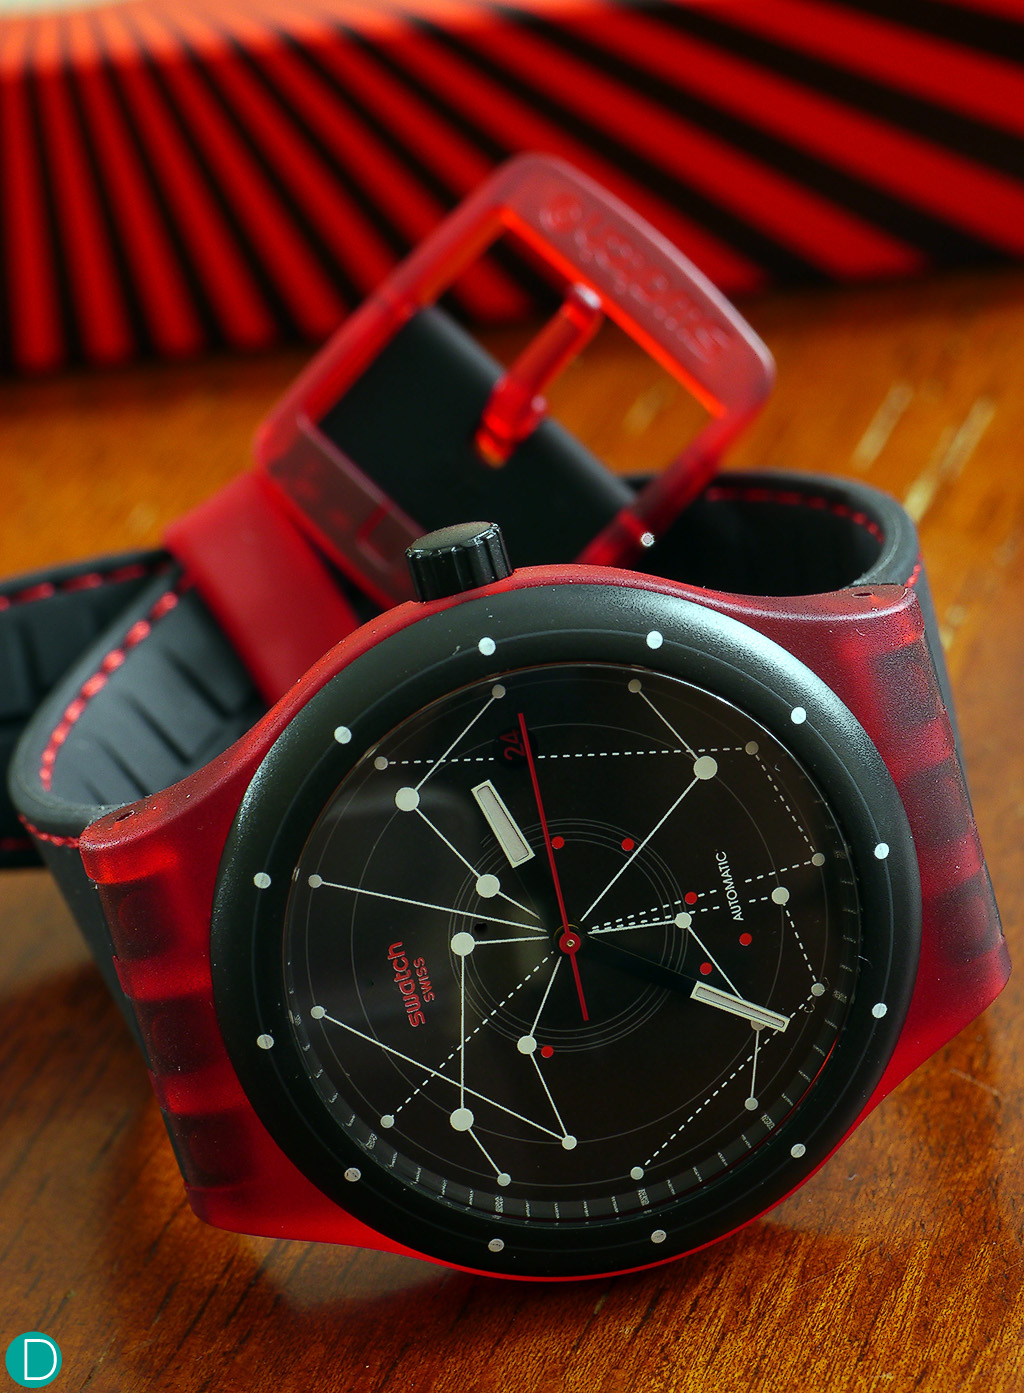 The Swatch Sistem 51, in red.